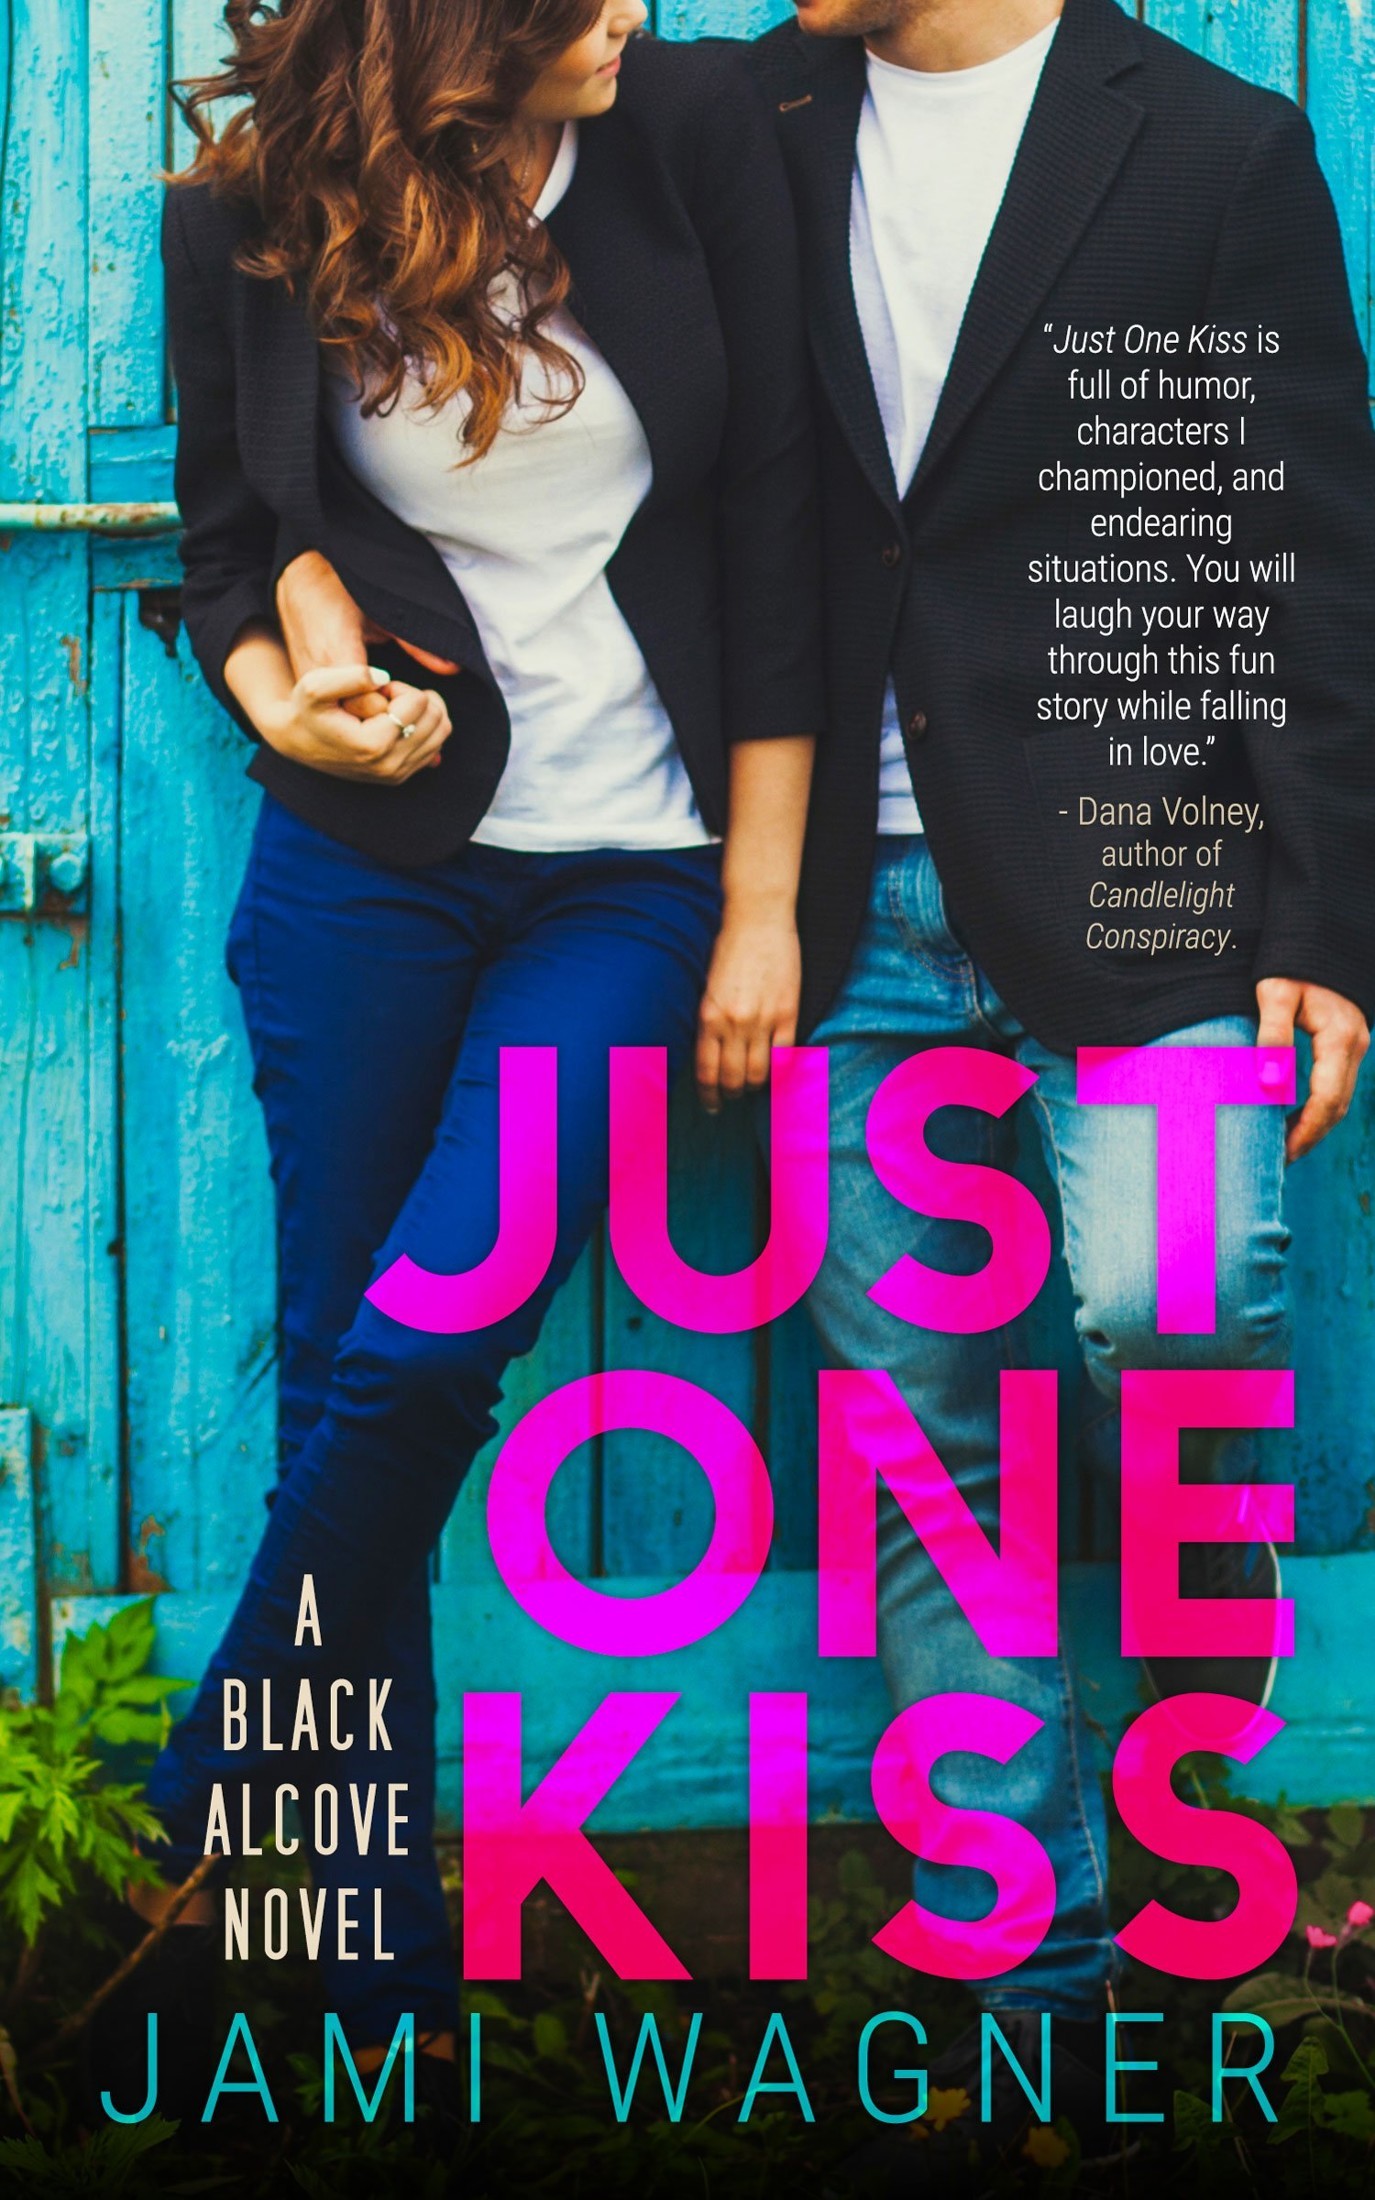 Just One Kiss: A Black Alcove Novel (The Black Alcove Series Book 1)